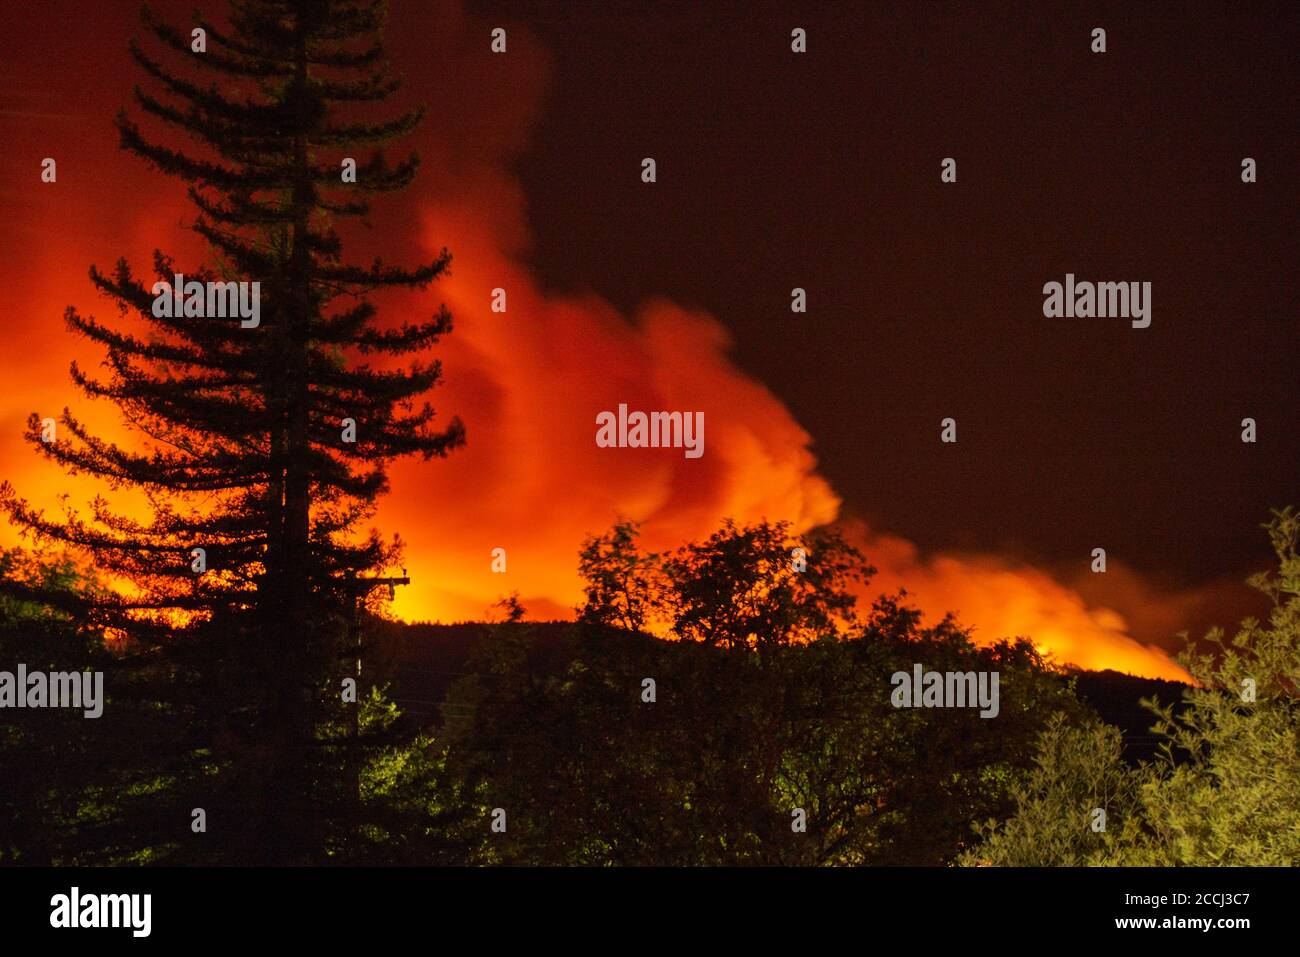 Walbridge Fire in Sonoma County seen at night from Windsor, California, part of the LNU lightning complex fire. Stock Photo